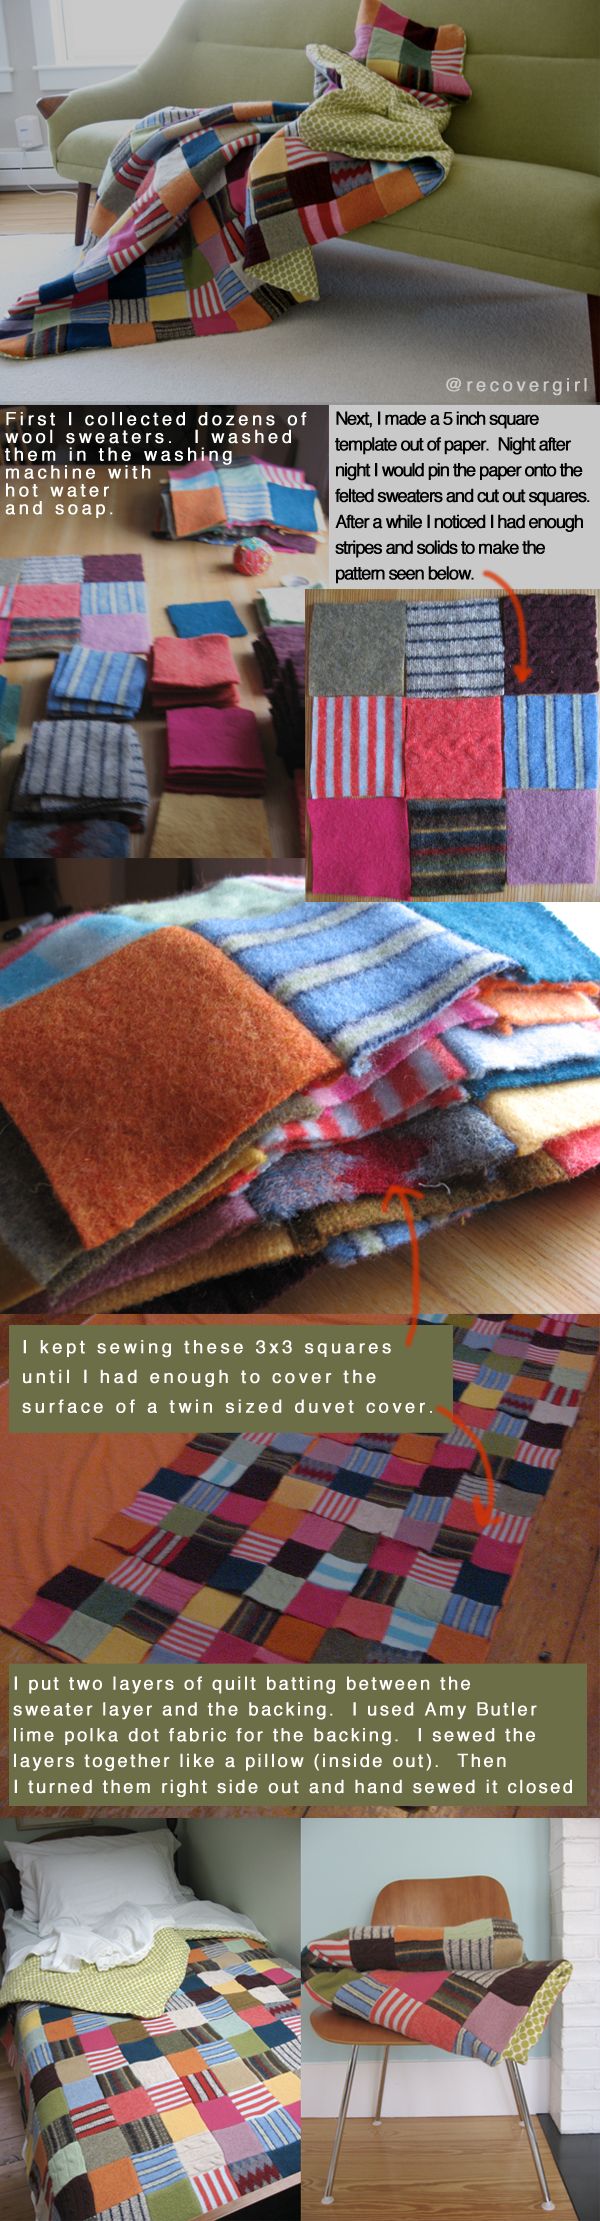 recycled wool sweaters